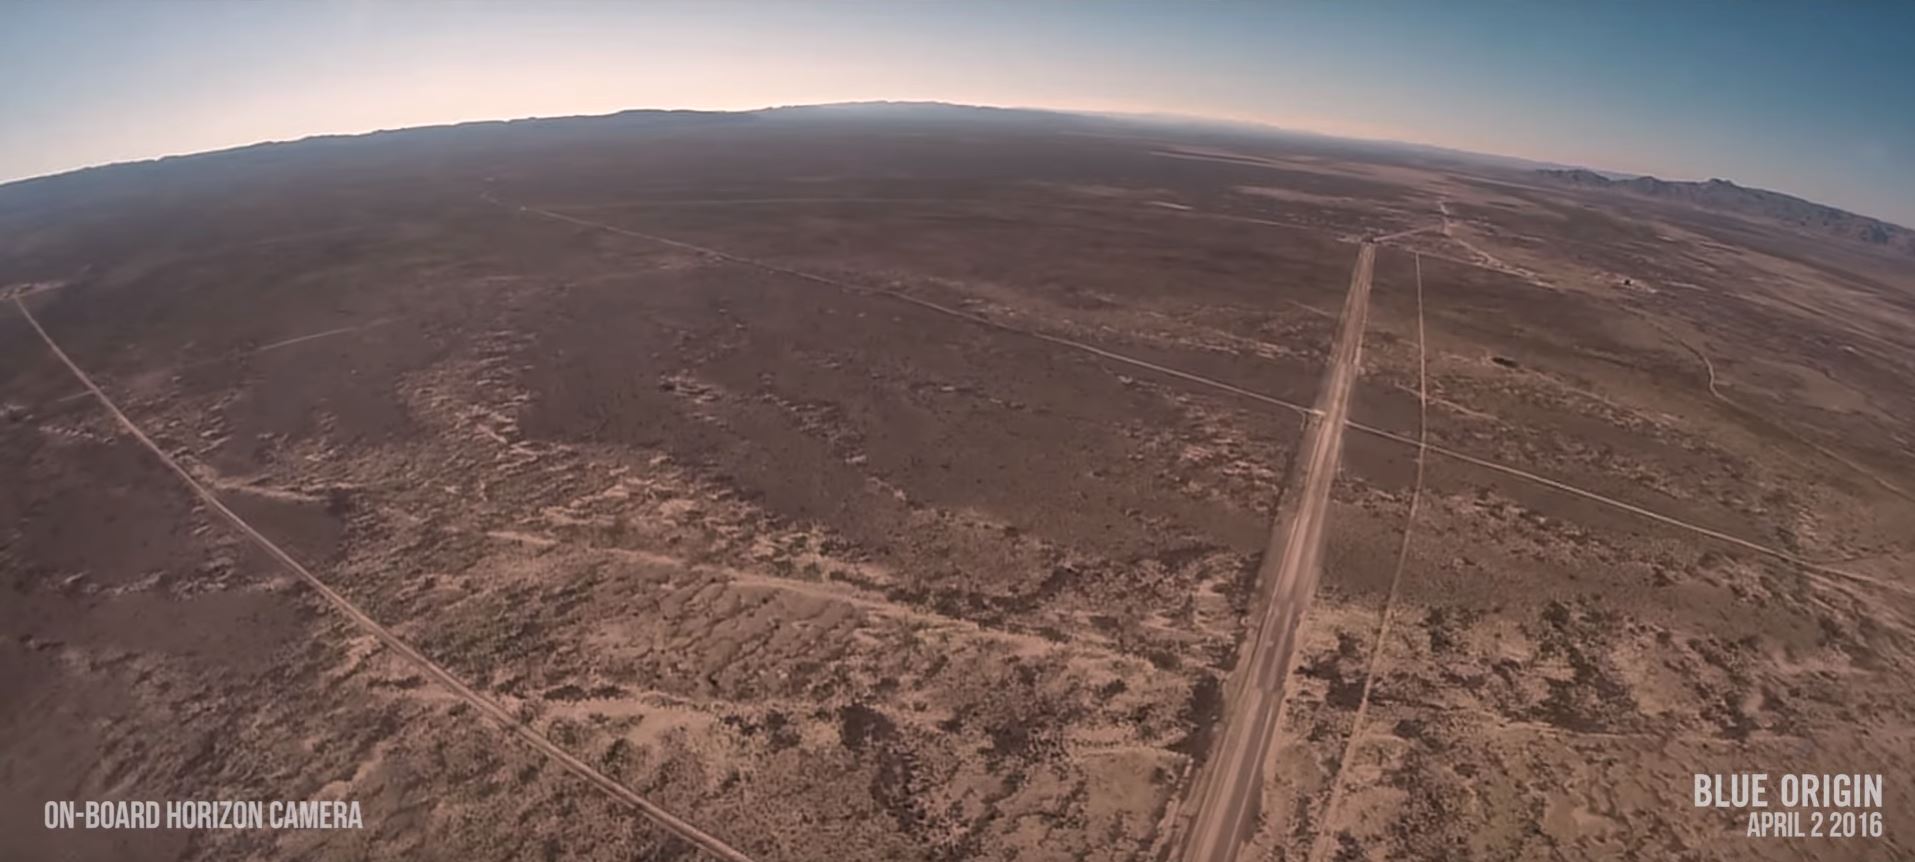 View From The Blue Origin Capsule